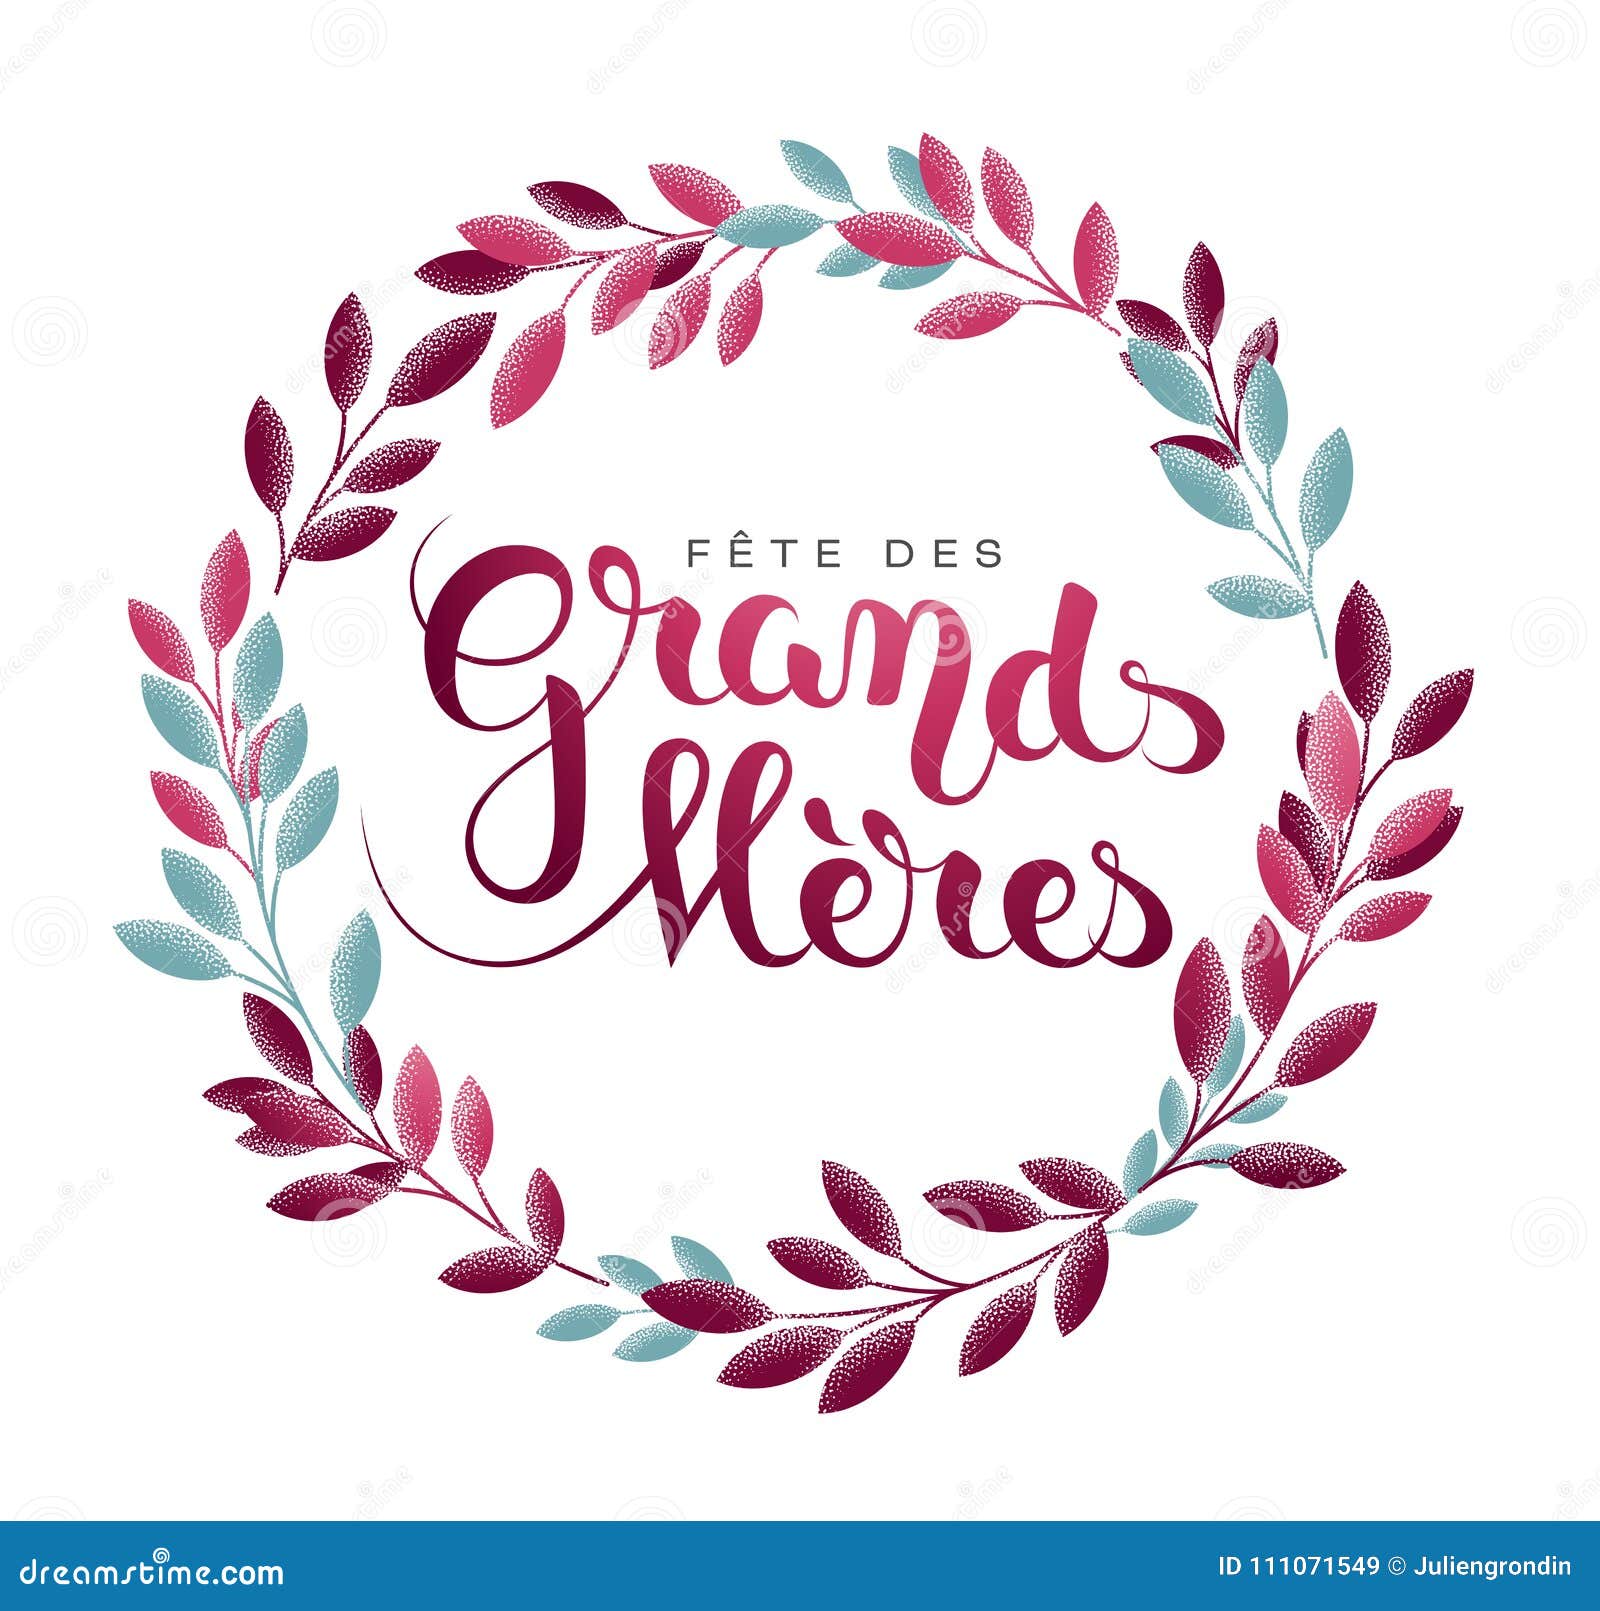 Grandmother S Day In French Fete Des Grands Meres Stock Illustration Illustration Of Female Round